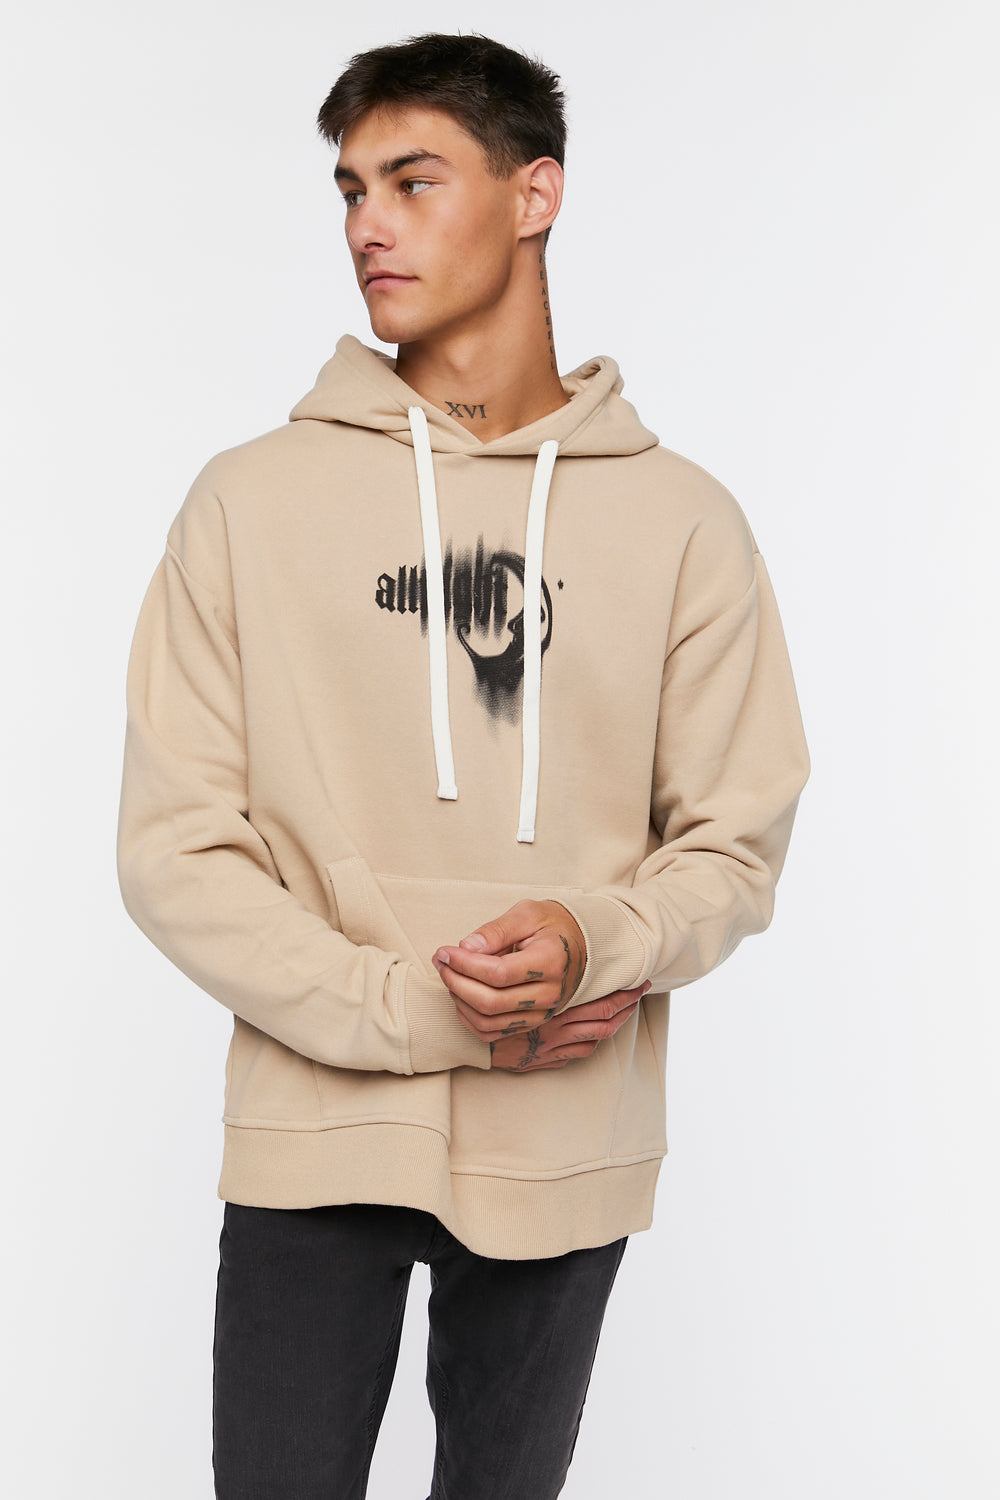 Allnight Graphic Hoodie Taupe